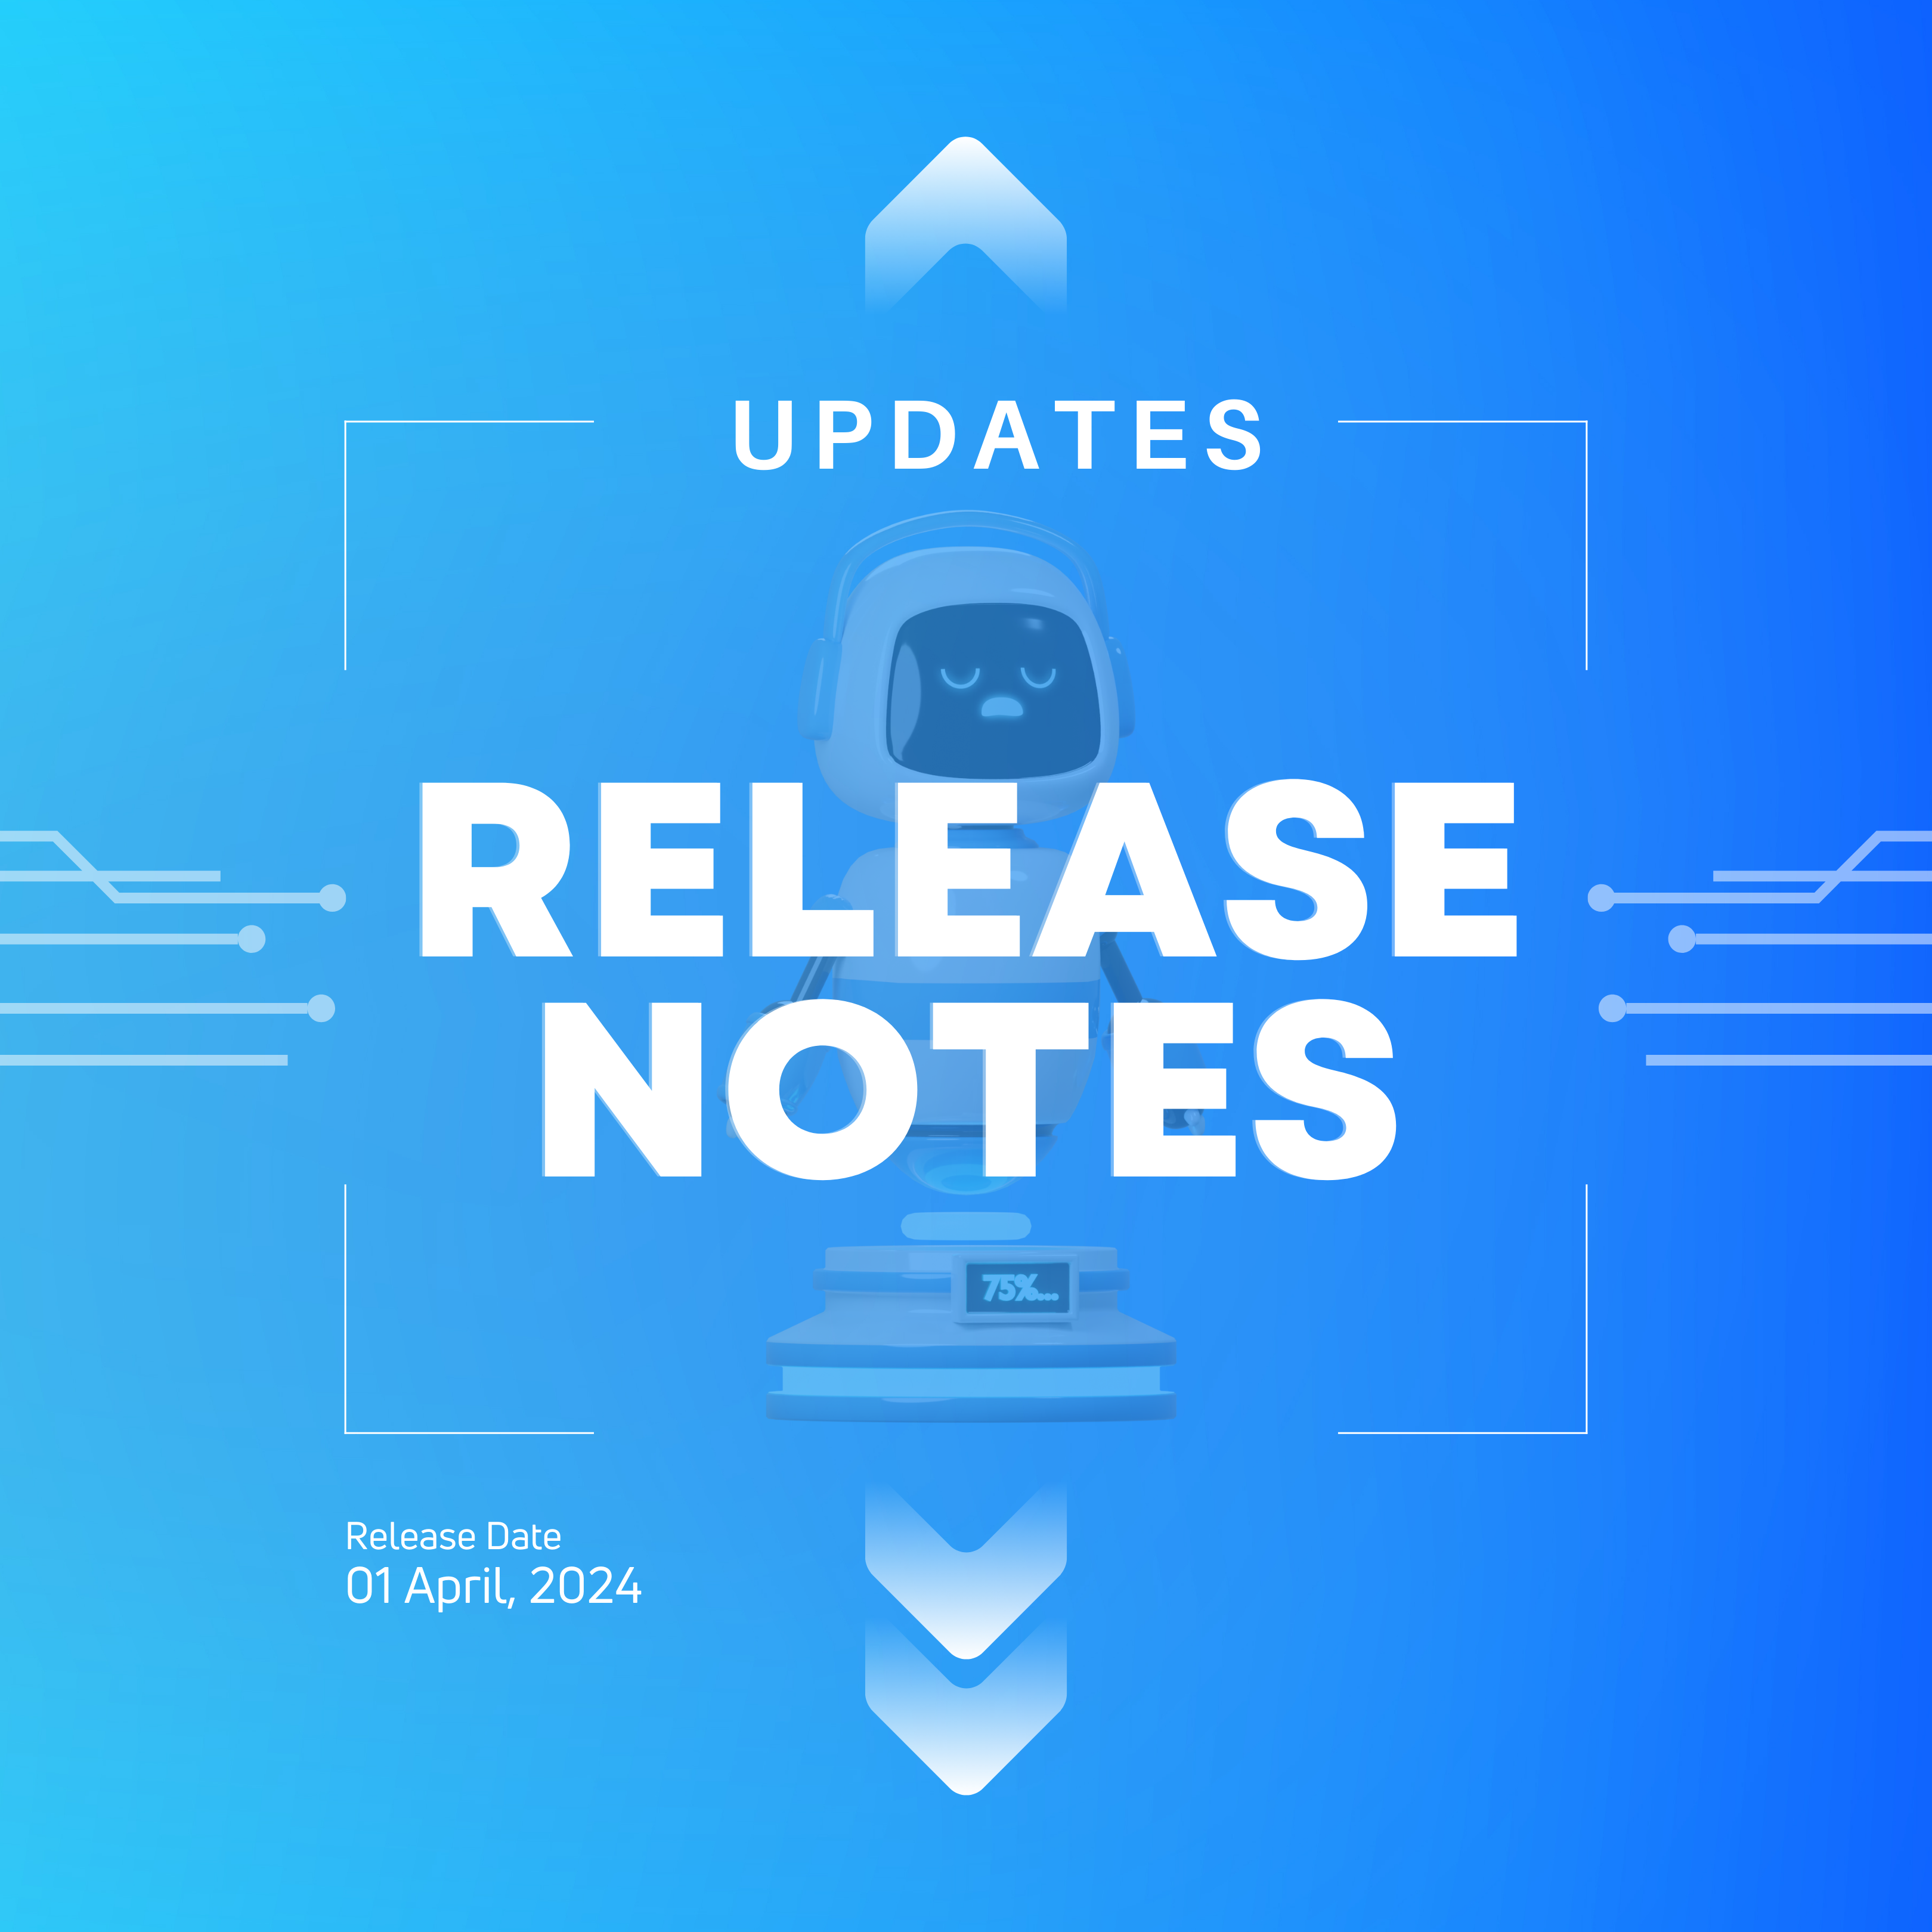  Release notes for first quarter of 2024 